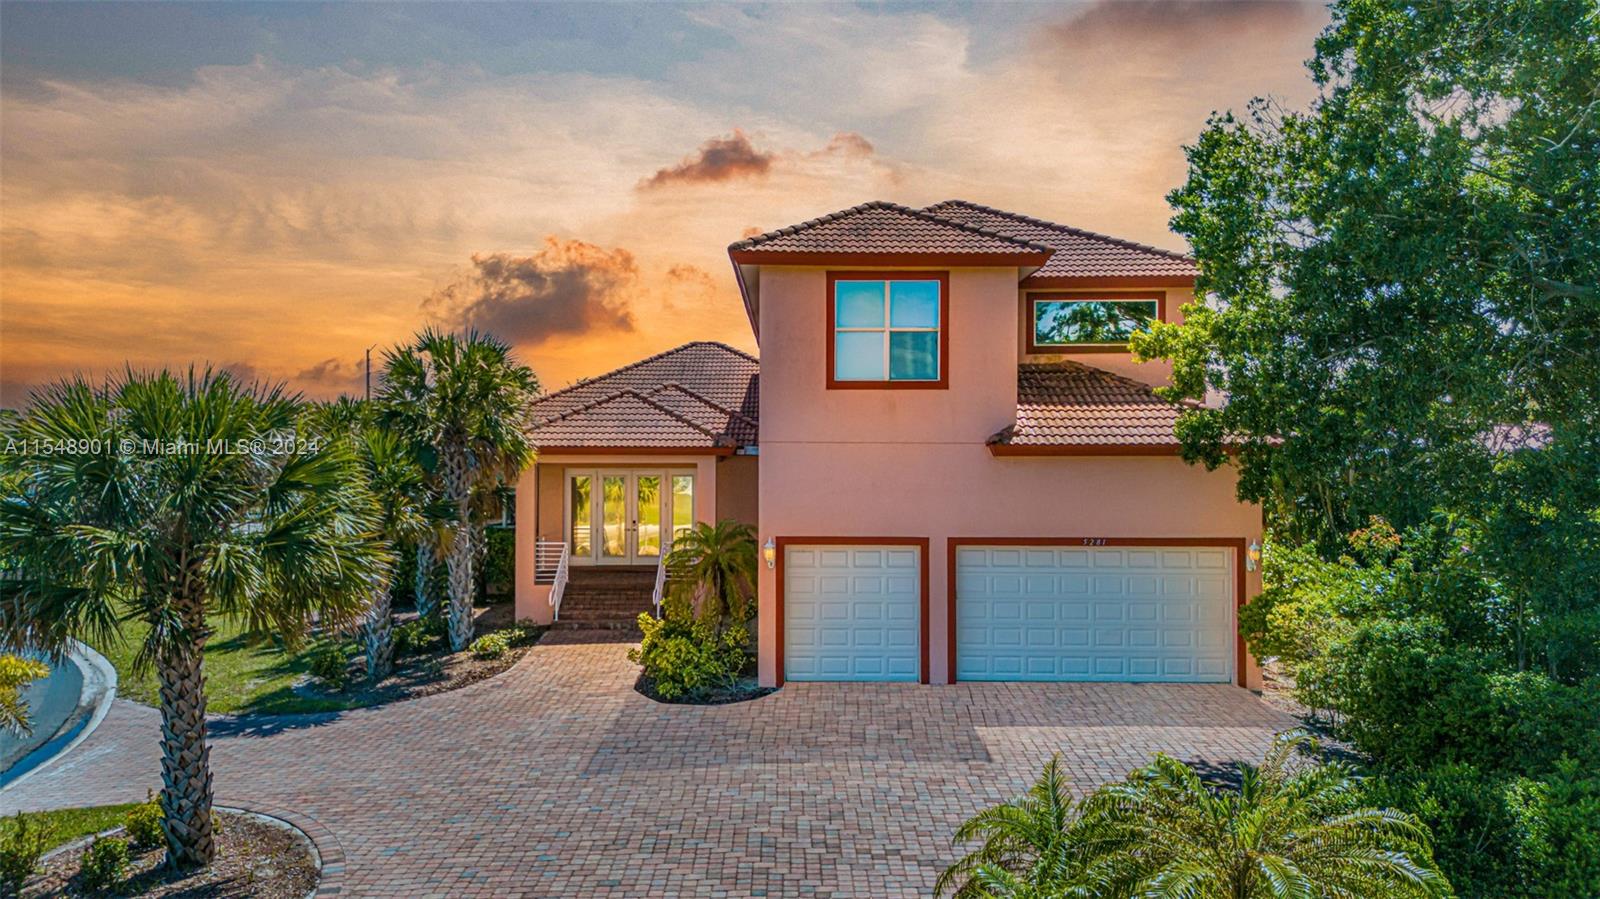 5281 Harborage Dr, Fort Myers, Lee County, Florida - 6 Bedrooms  
6 Bathrooms - 